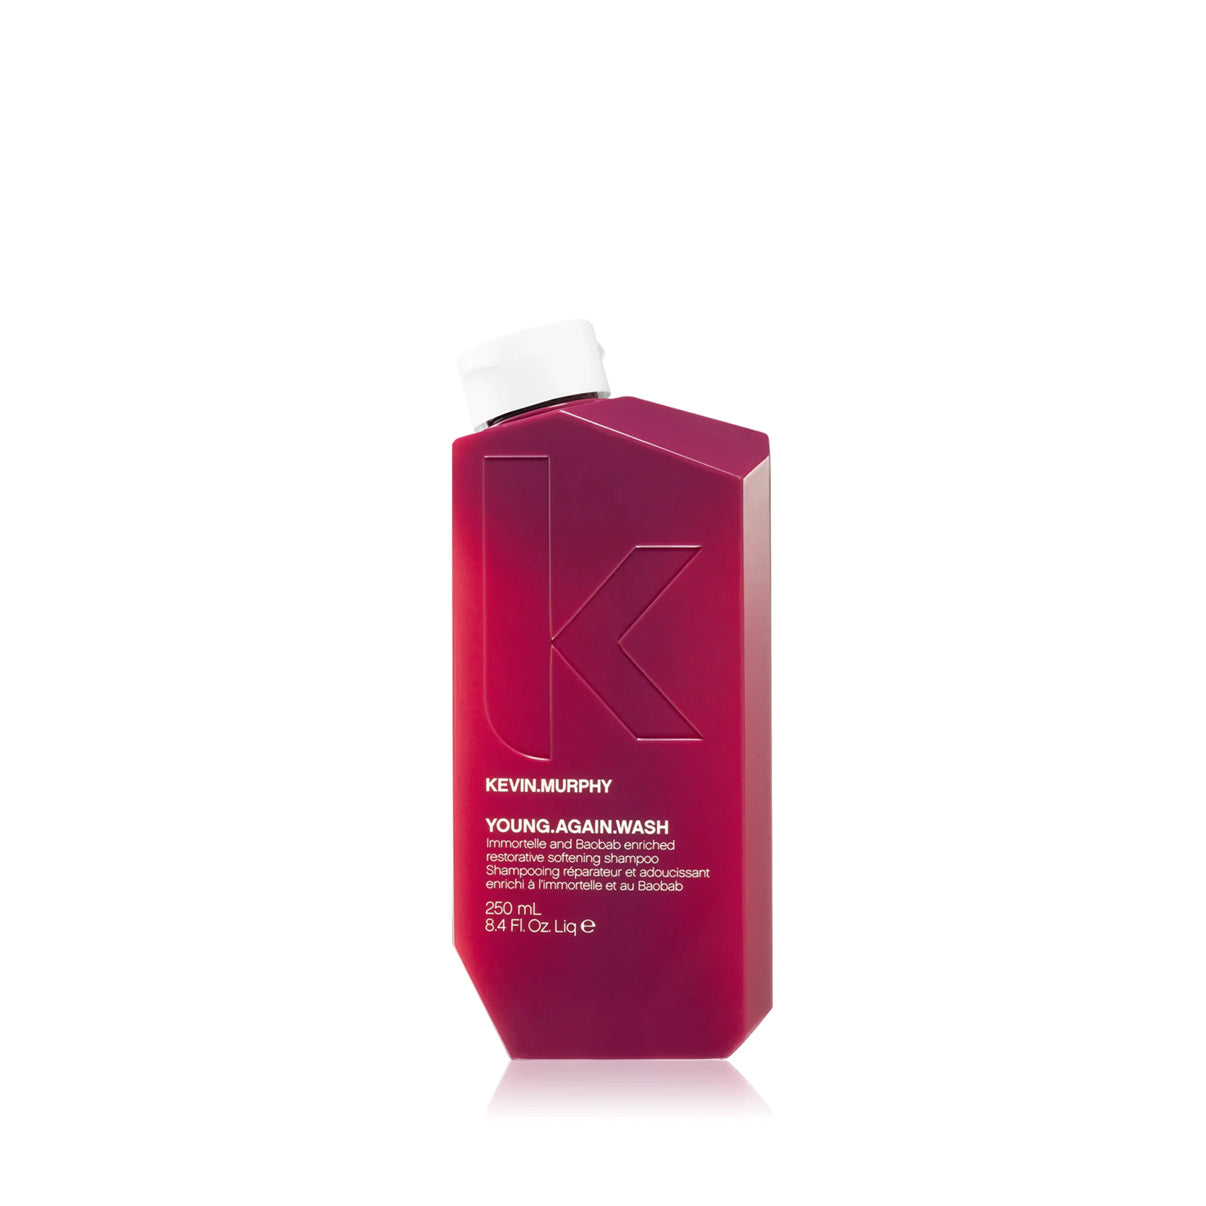 KEVIN.MURPHY YOUNG.AGAIN.WASH